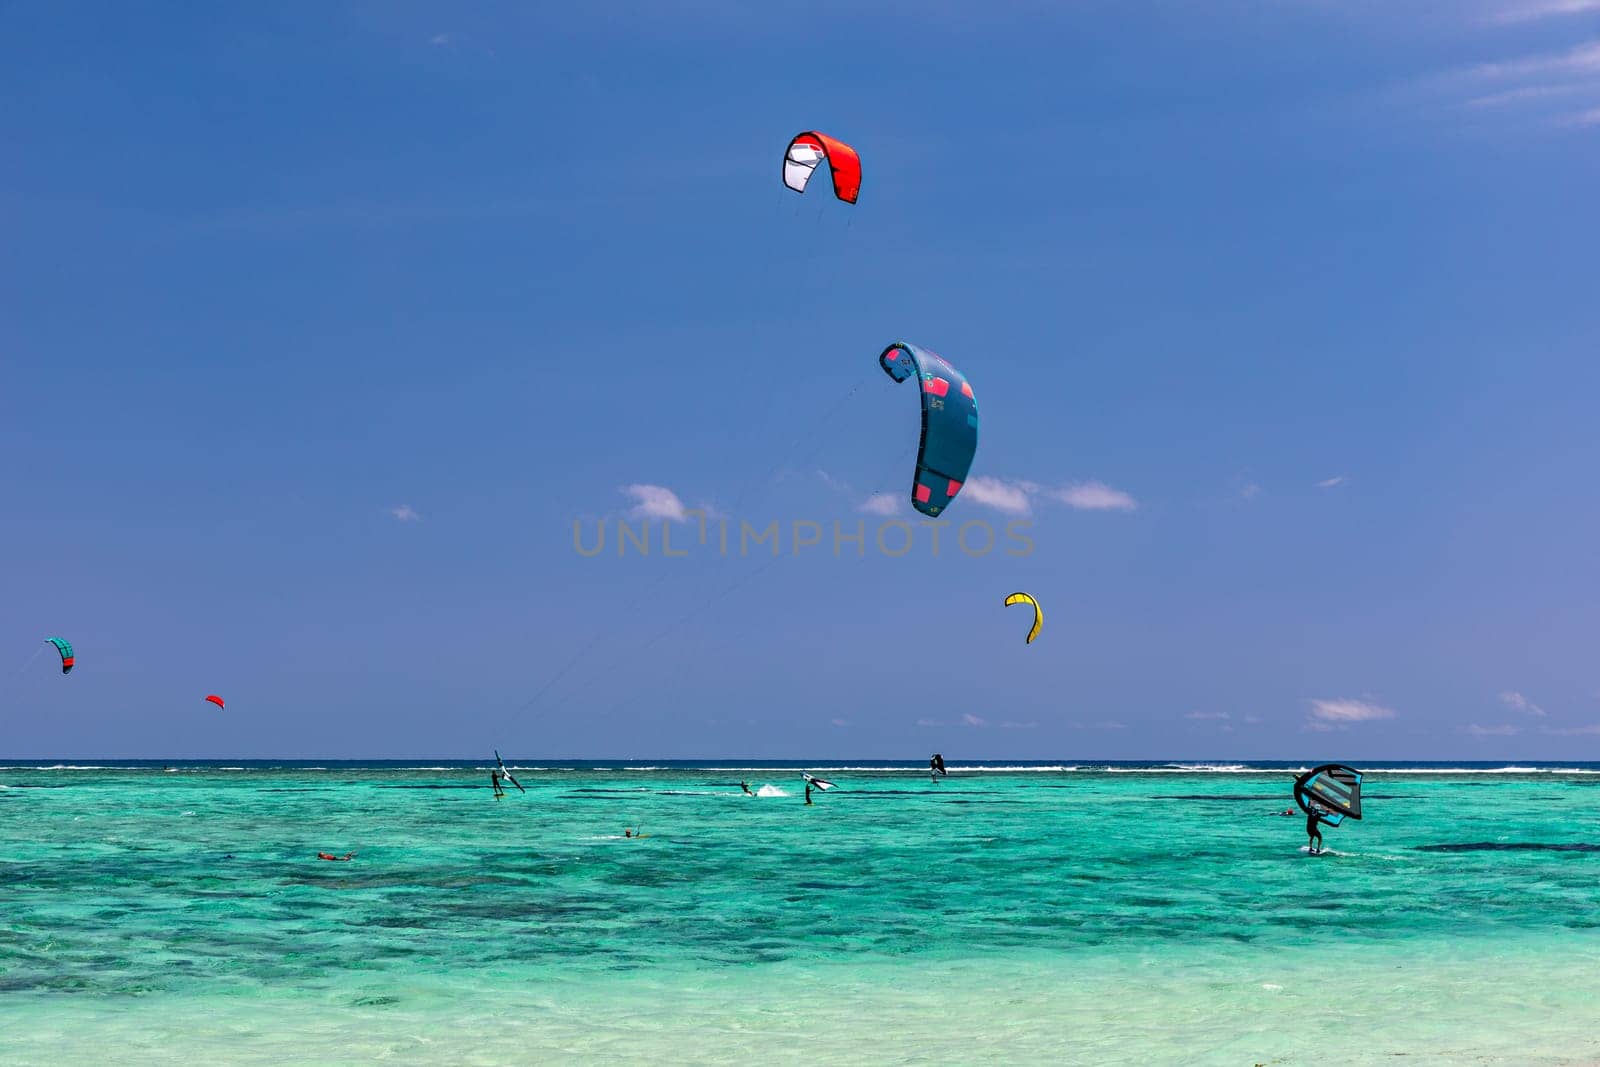 Kite surfers in the waters of Indian Ocean, Mauritius. Kite surfing in the clear waters of the Indian Ocean in Le Morne beach, Mauritius. Best Kite surfing experience at Mauritius island. by DaLiu